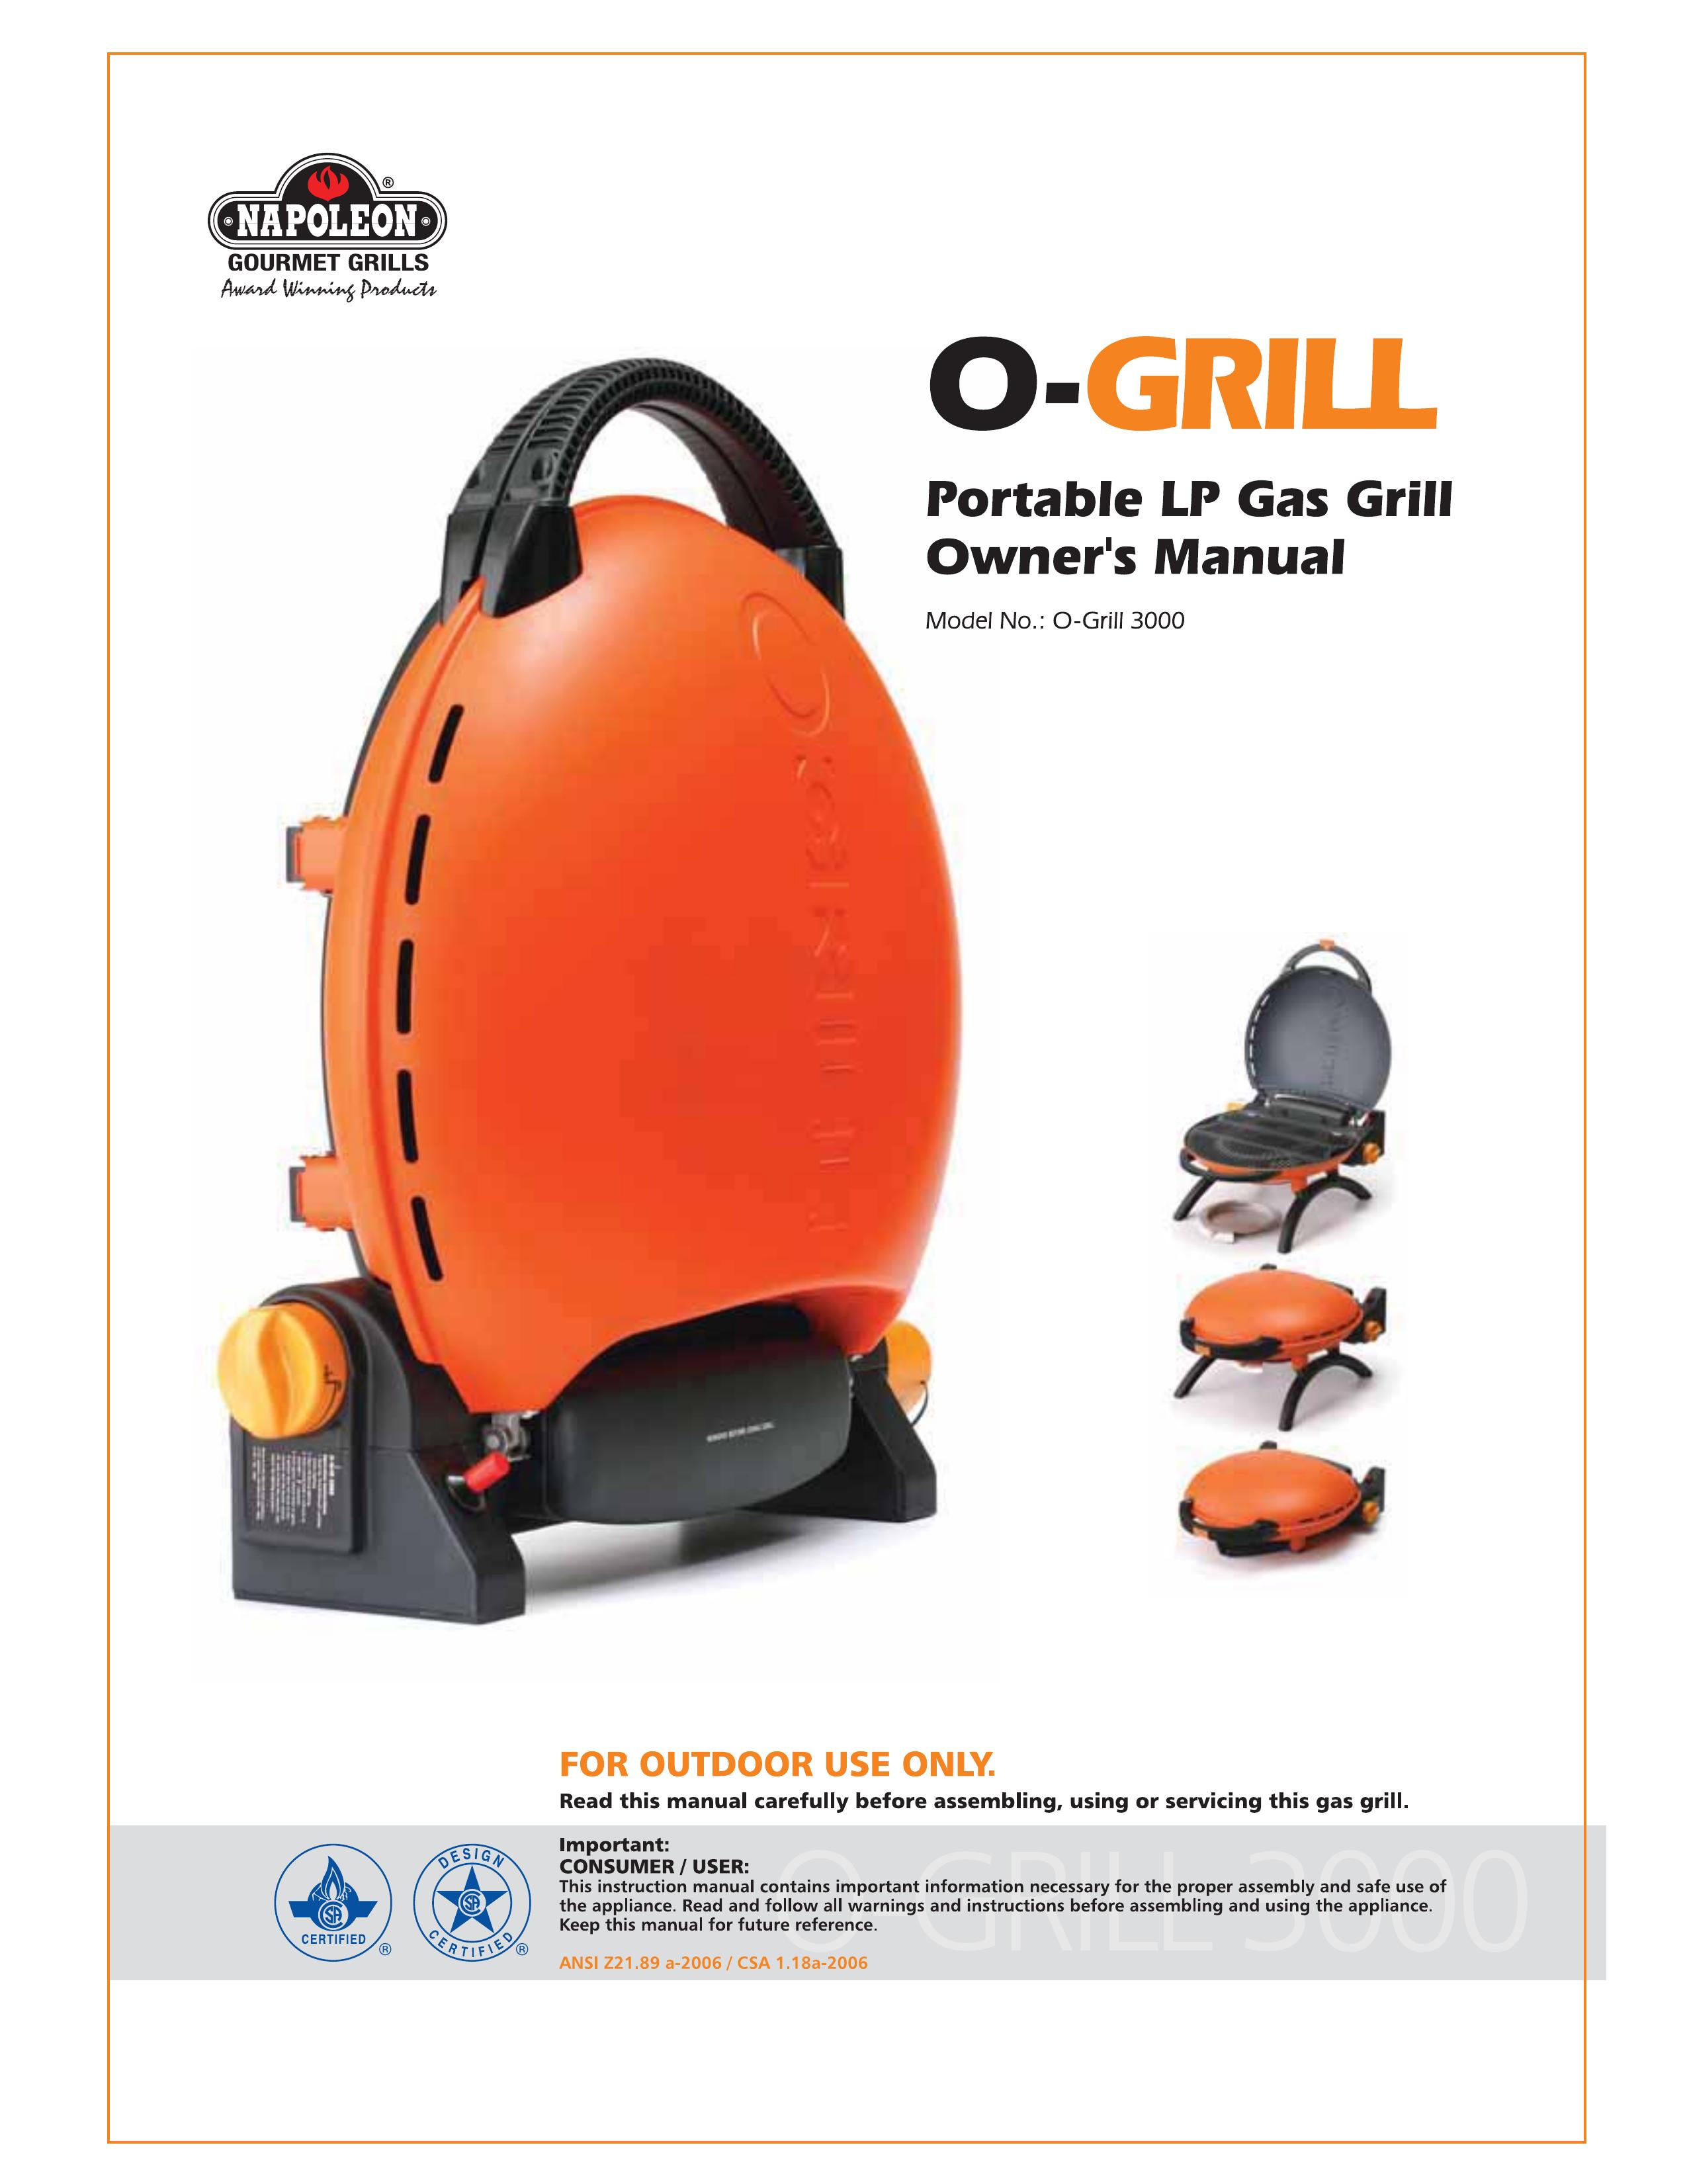 Napoleon Grills O-Grill 3000 Gas Grill User Manual